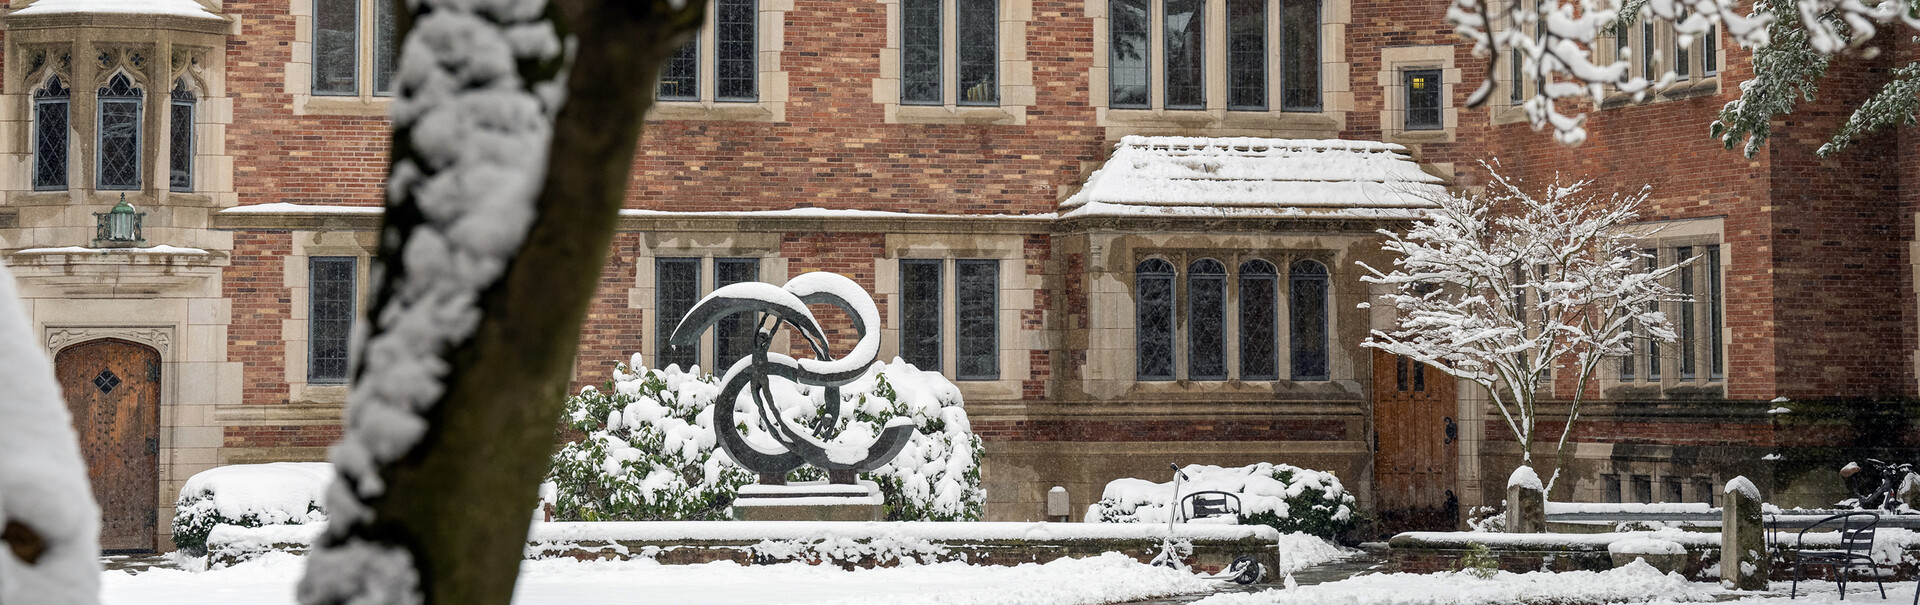 The Courtyard at YLS blanketed in snow